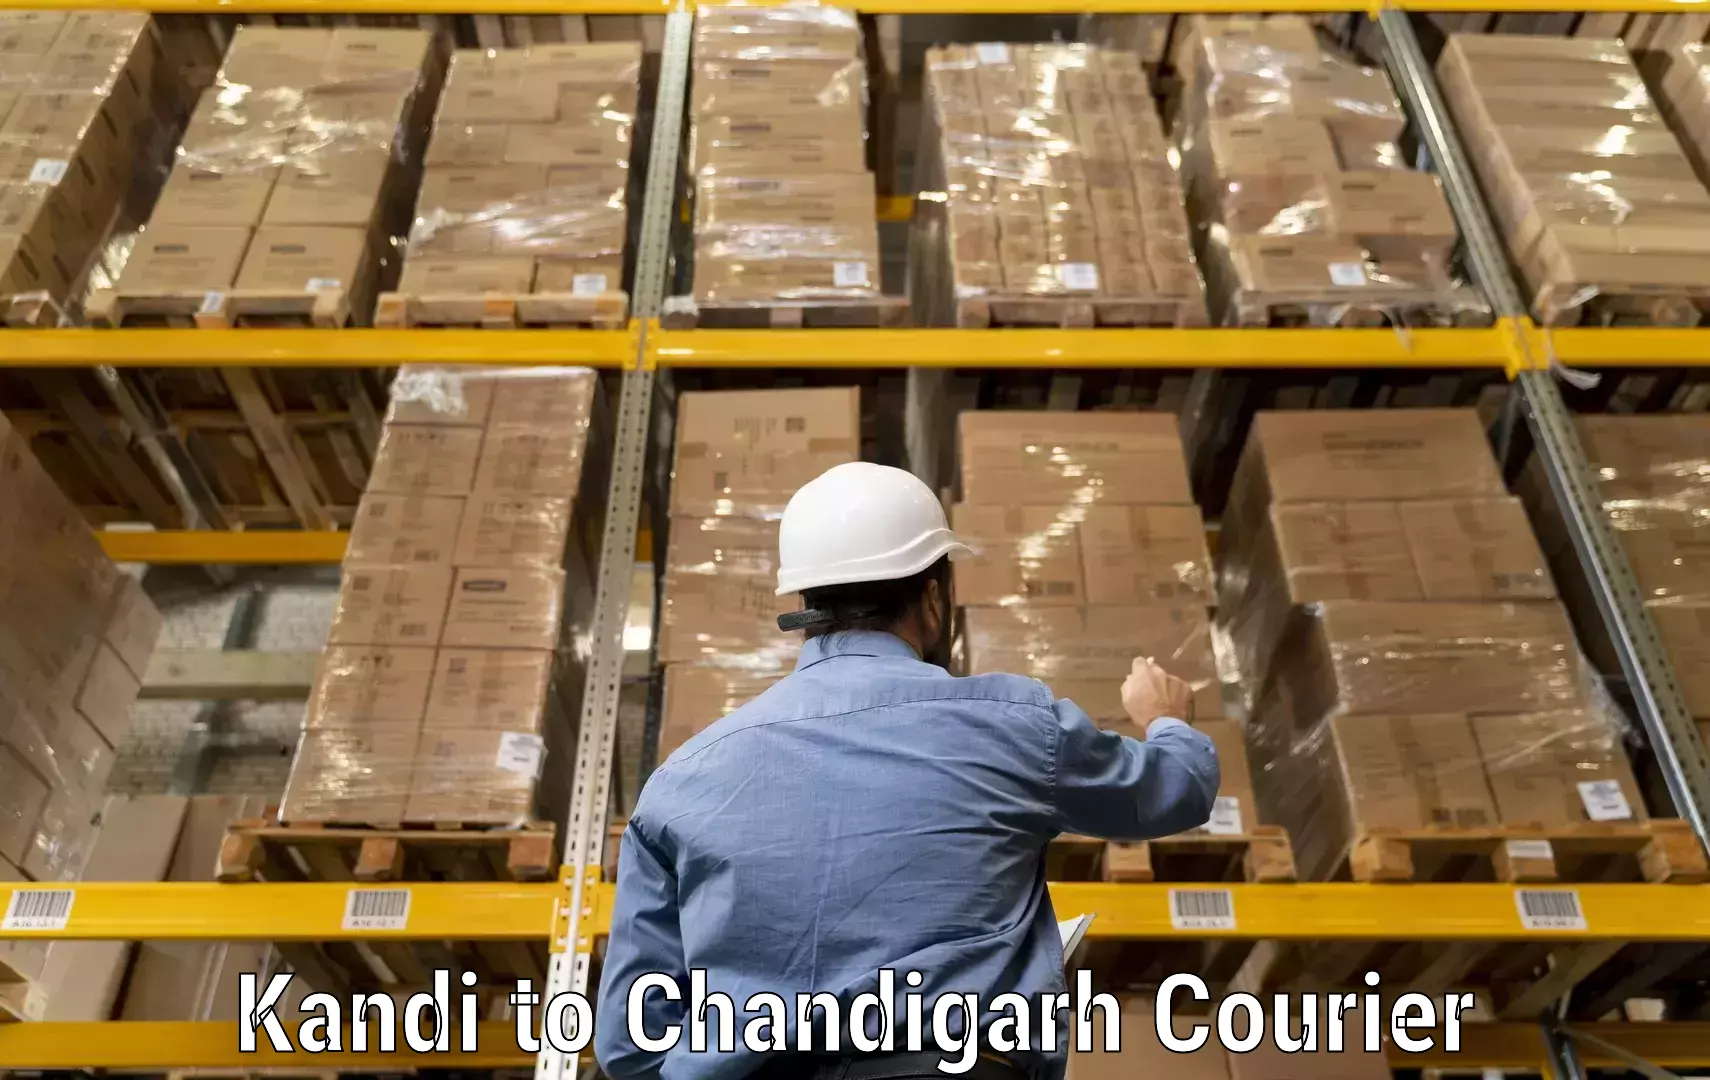 Express delivery capabilities in Kandi to Chandigarh